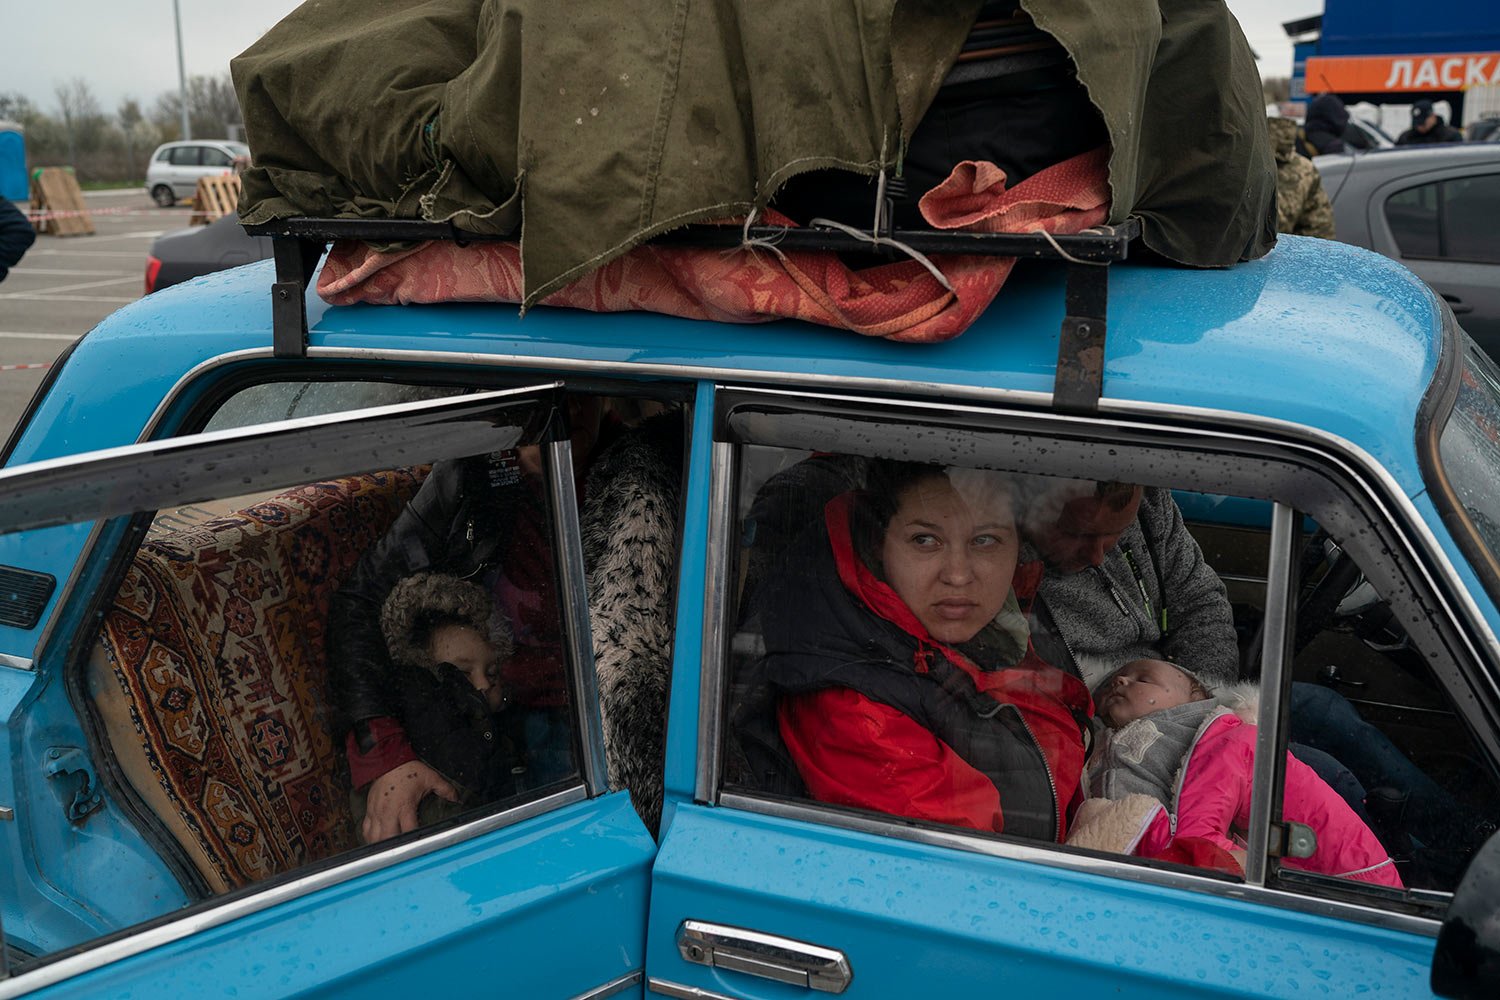  Internally displaced people from Mariupol and nearby towns arrive at a refugee center fleeing from the Russian attacks, in Zaporizhzhia, Ukraine, Thursday, April 21, 2022. (AP Photo/Leo Correa) 